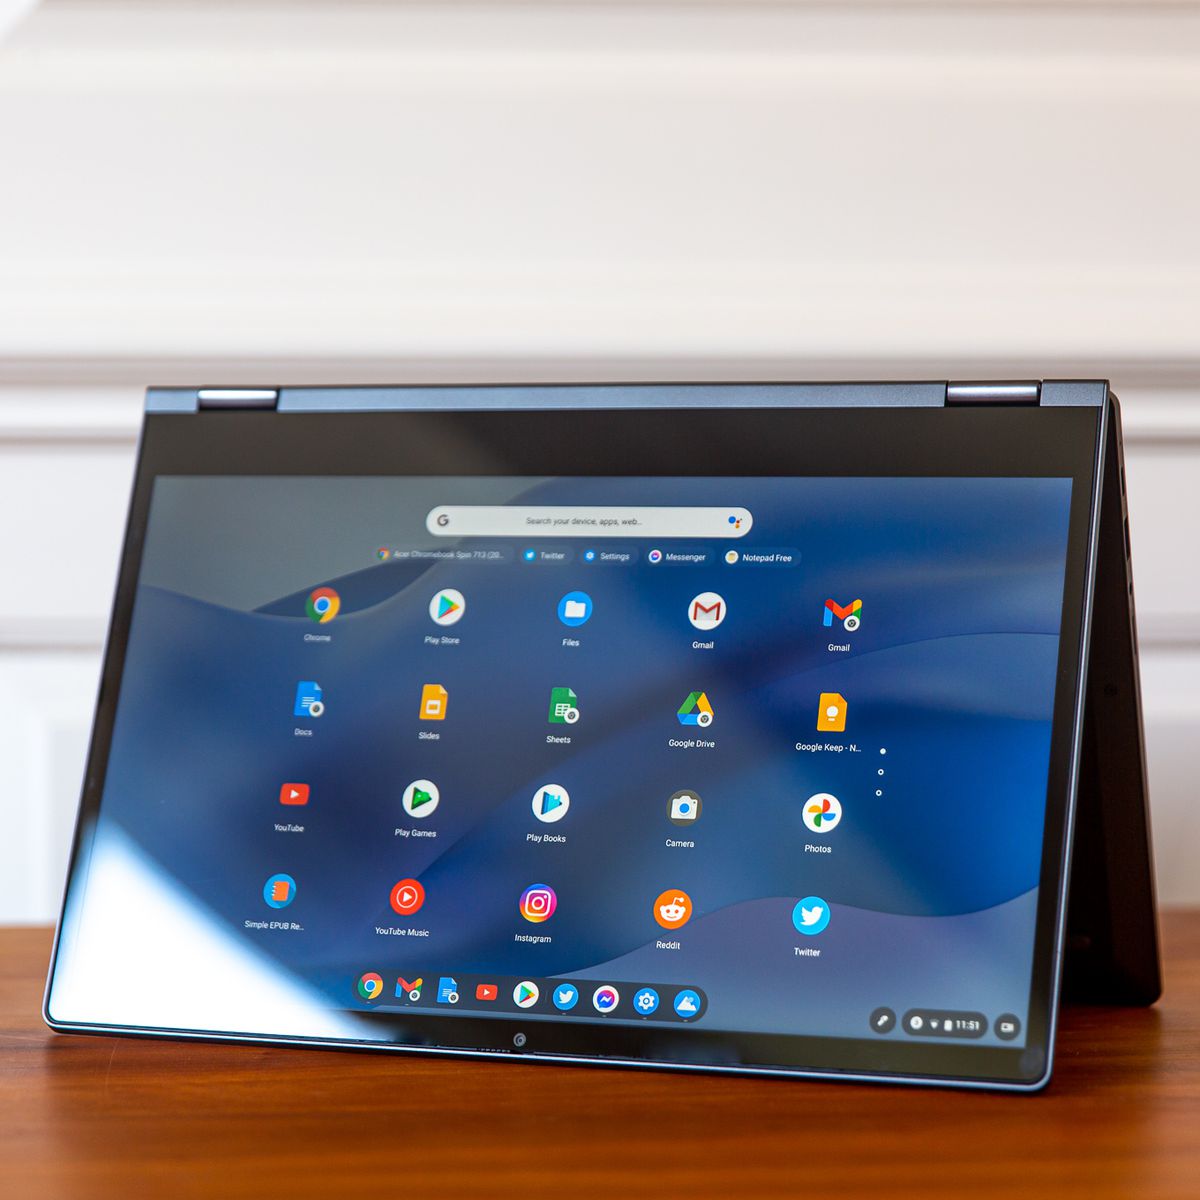 The Lenovo Flex 5 Chromebook in tent mode, tilted to the left.  The screen shows a grid of Chrome OS icons on a blue wavy background.